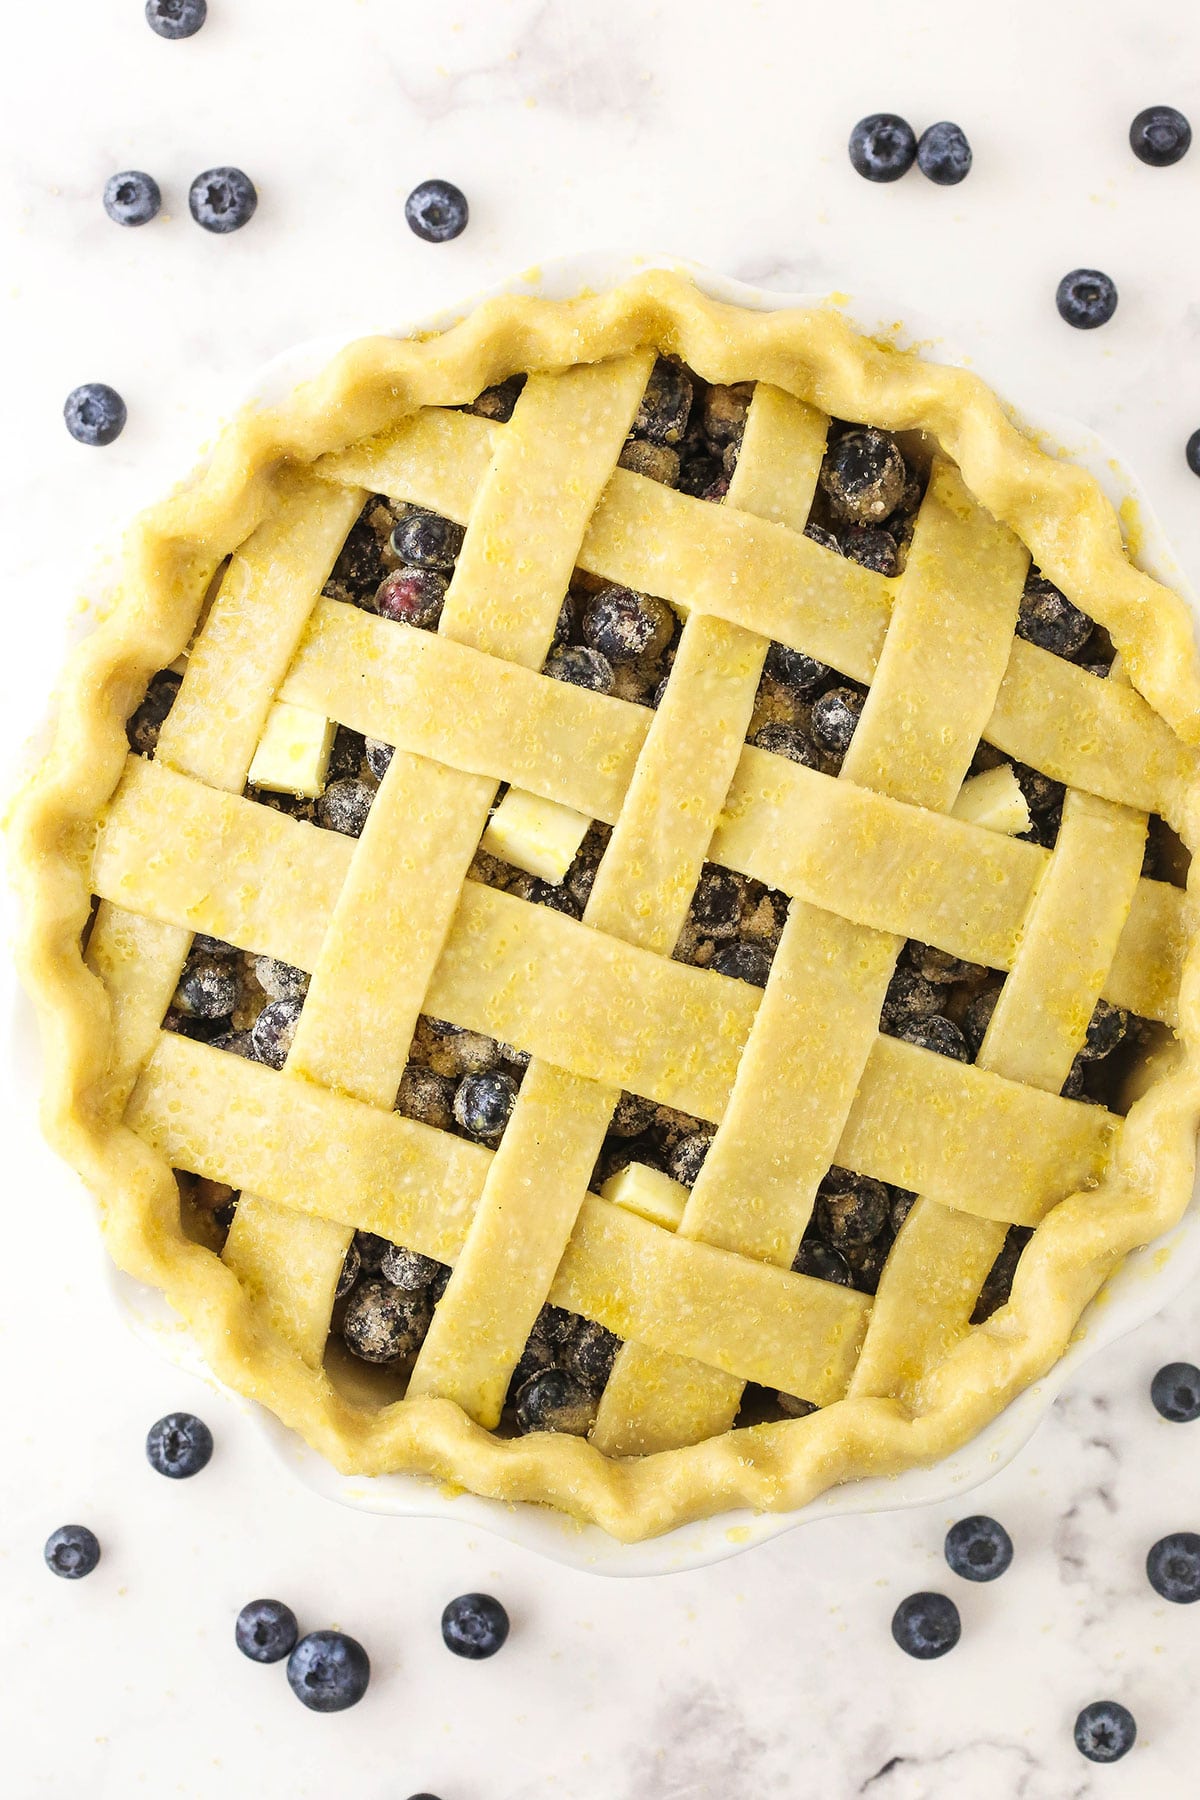 An unbaked blueberry pie brushed with eggwash and sprinkled with turbinado sugar